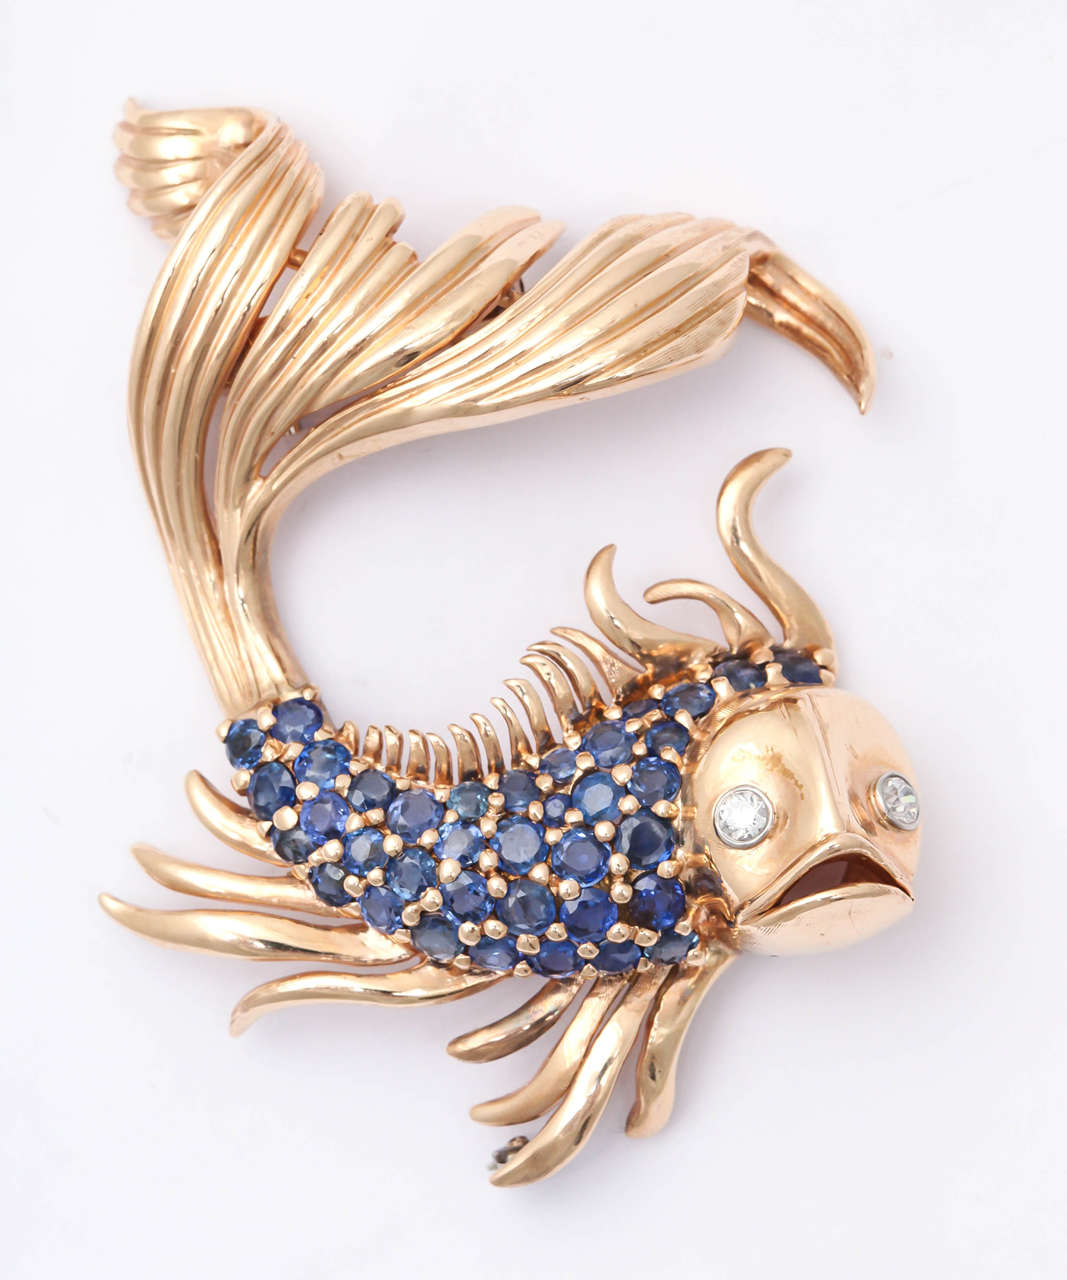 Marvelous 14kt Rose Gold Goldfish Clip - very animated and lively.  Body set with 4-5 carats of lively blue faceted  Sapphires. The eyes are set with Diamonds.
Great for a sporty look or as a dramatic foil for a black evening dress.  One of a kind.